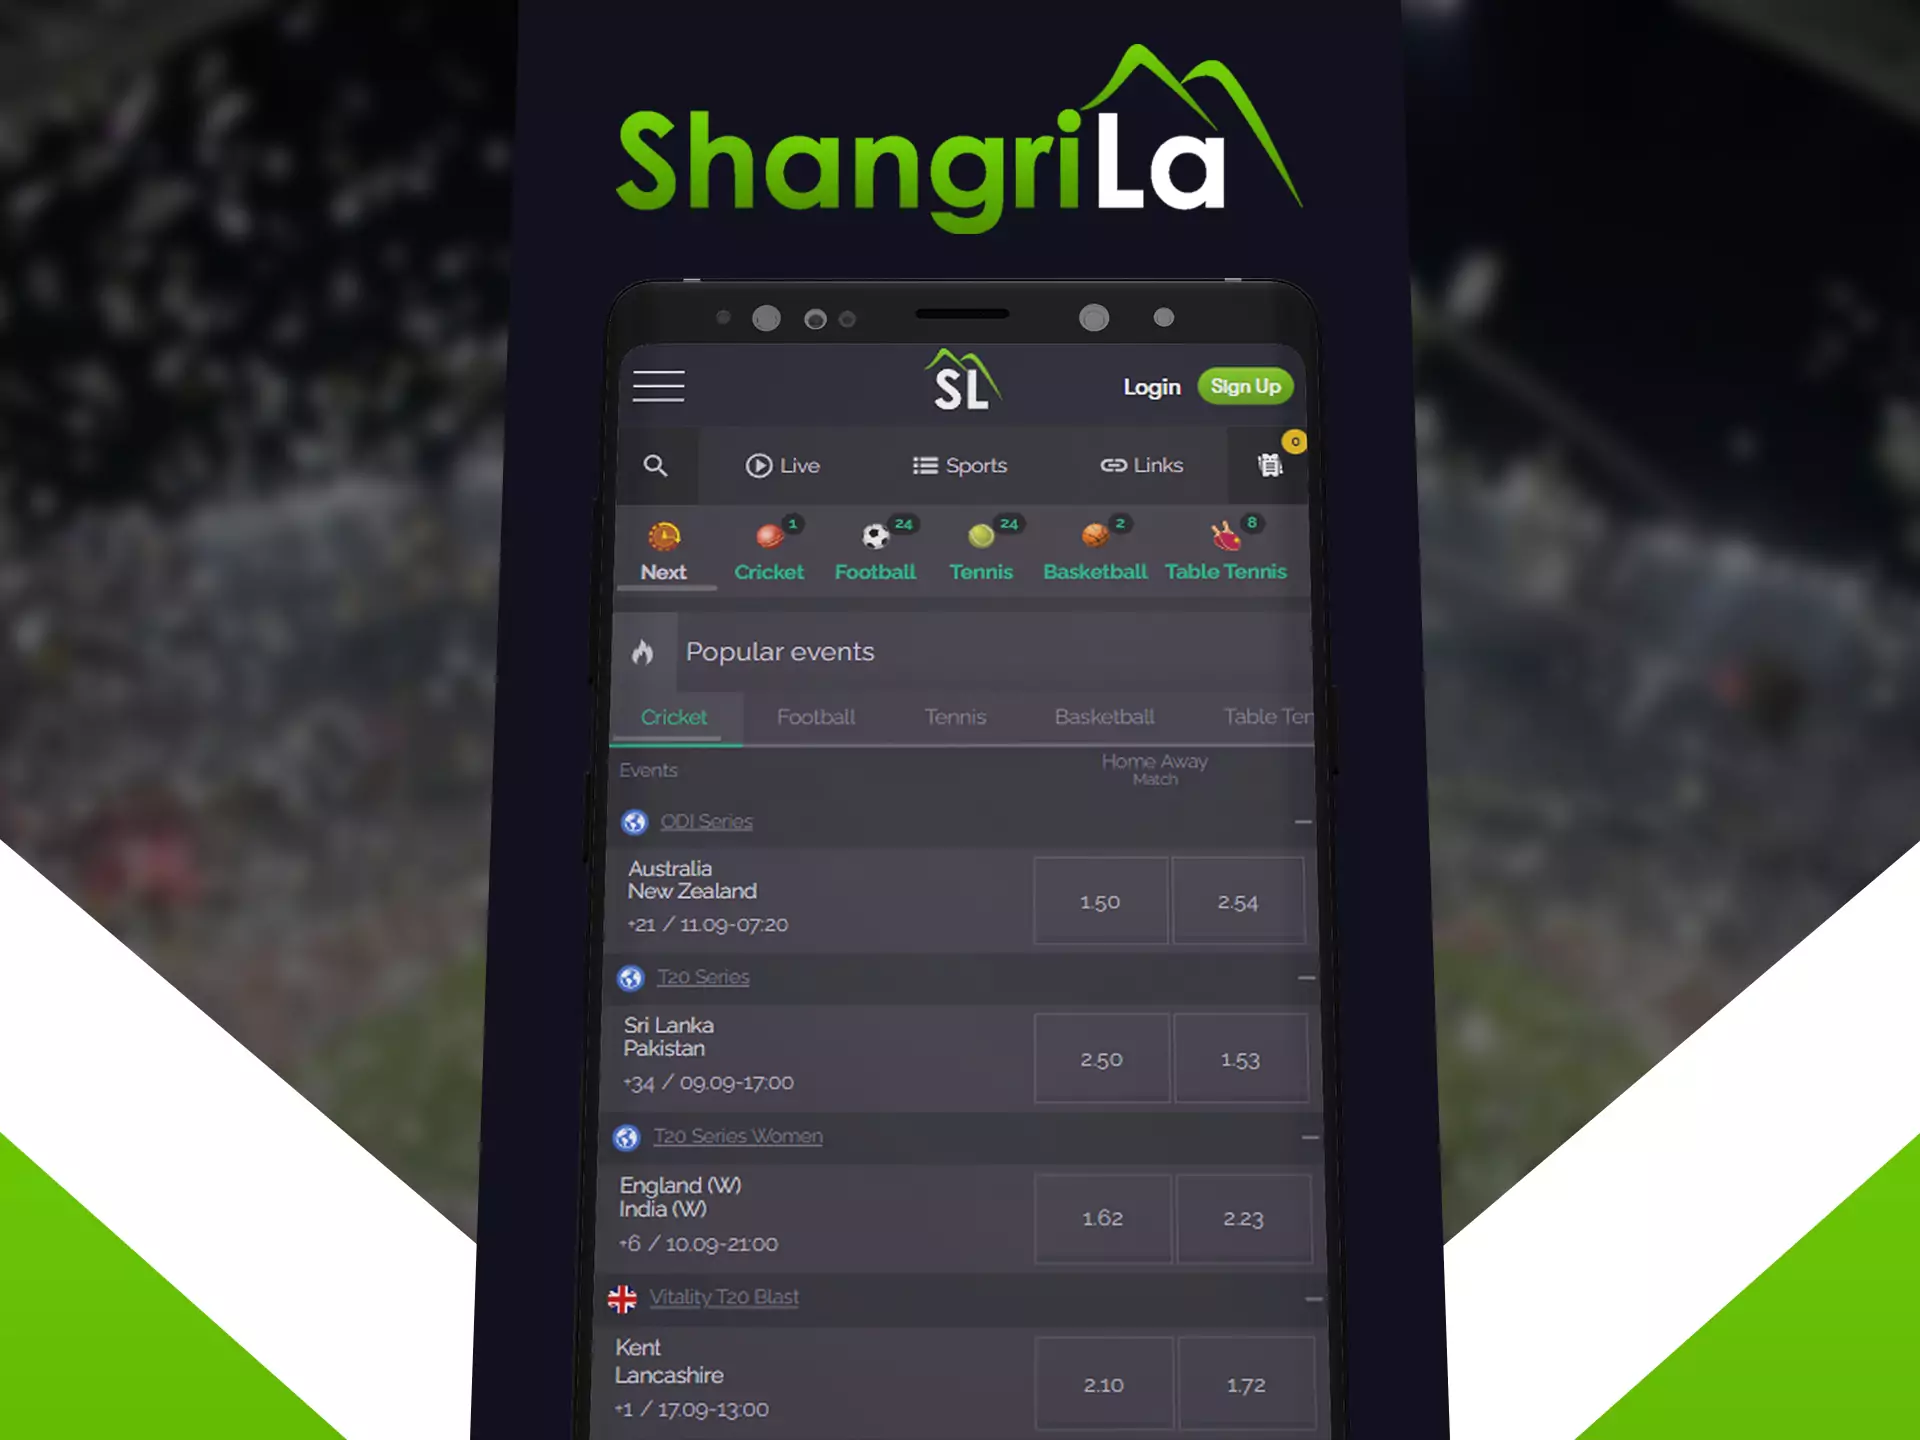 Learn and use all of the betting possibilities of Shangri La app.